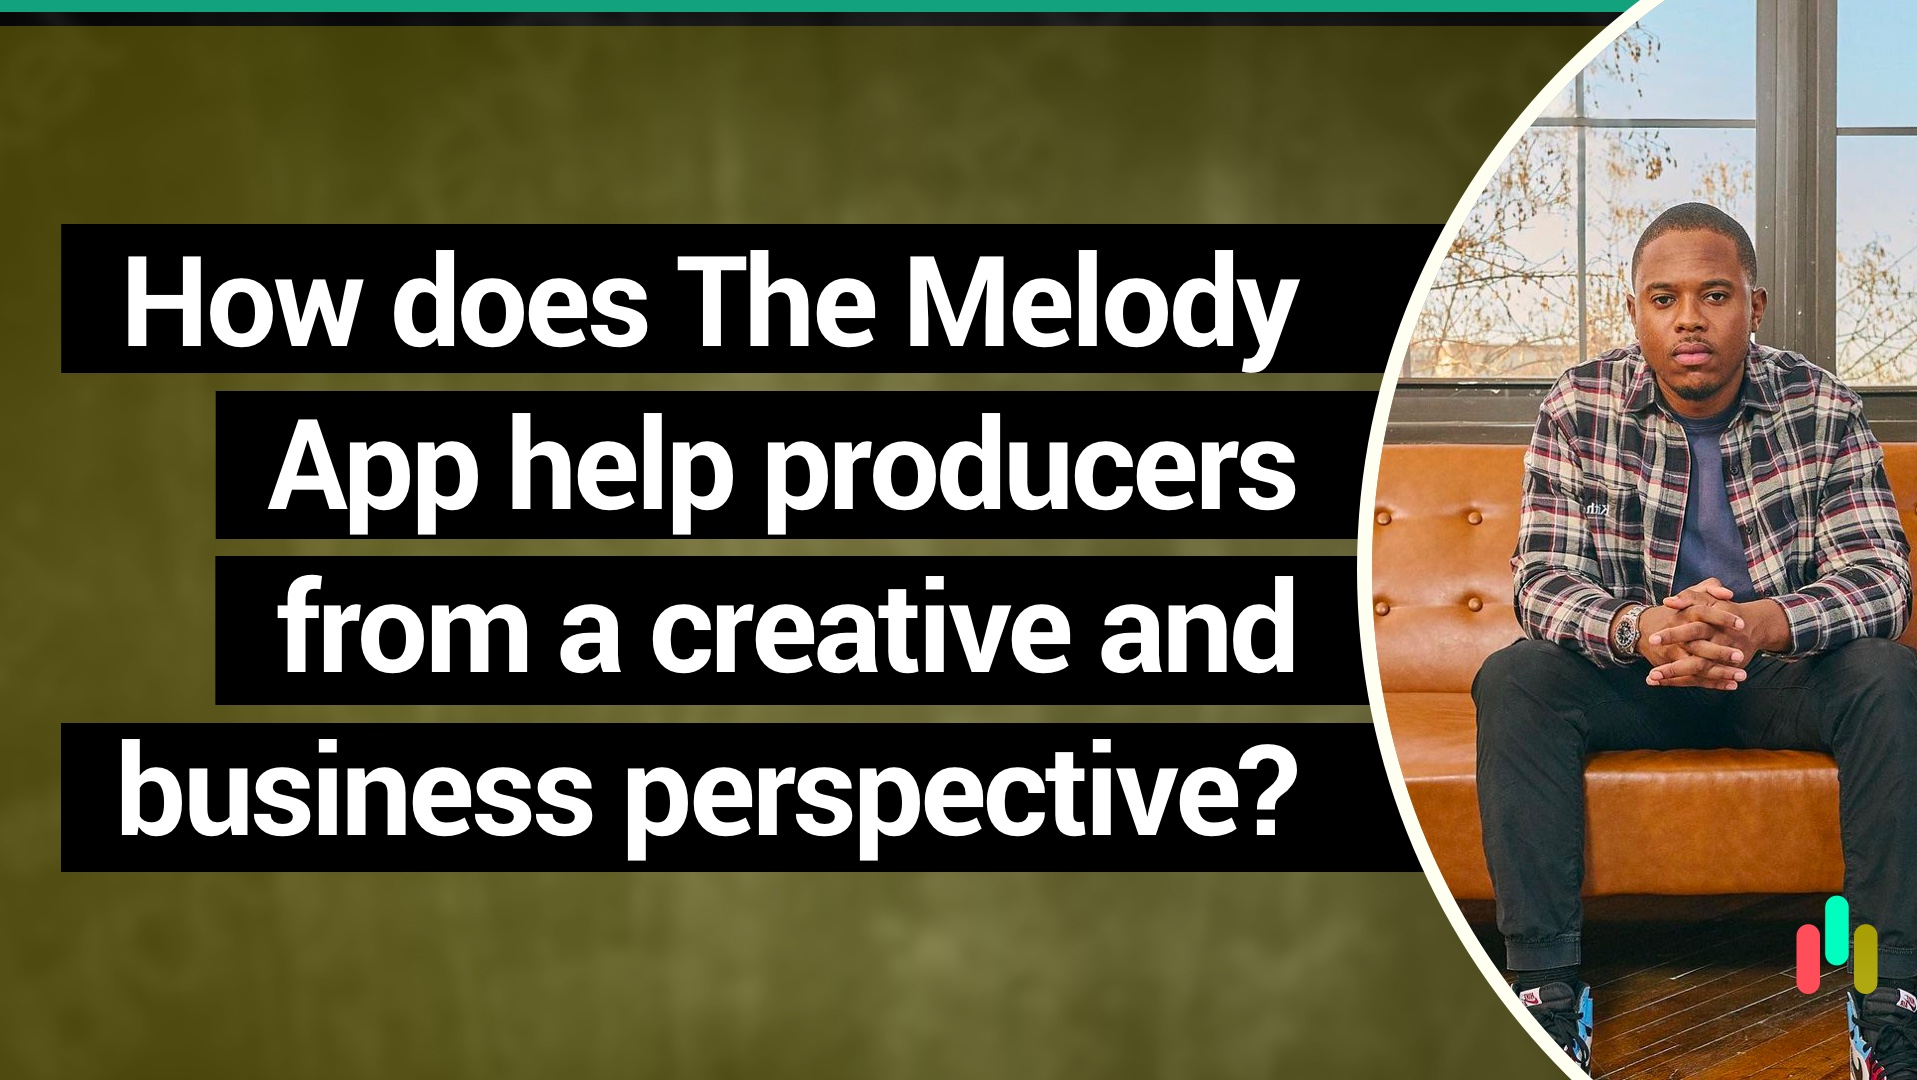 Prominent entertainment attorney, @evgle Co-Founder/COO, music business professor, entrepreneur, and member of the Board of Advisors for The Melody App @esqfowlkes answers the question: “How does @themelodyapp help producers from a creative and business perspective?” ???‍♂️?